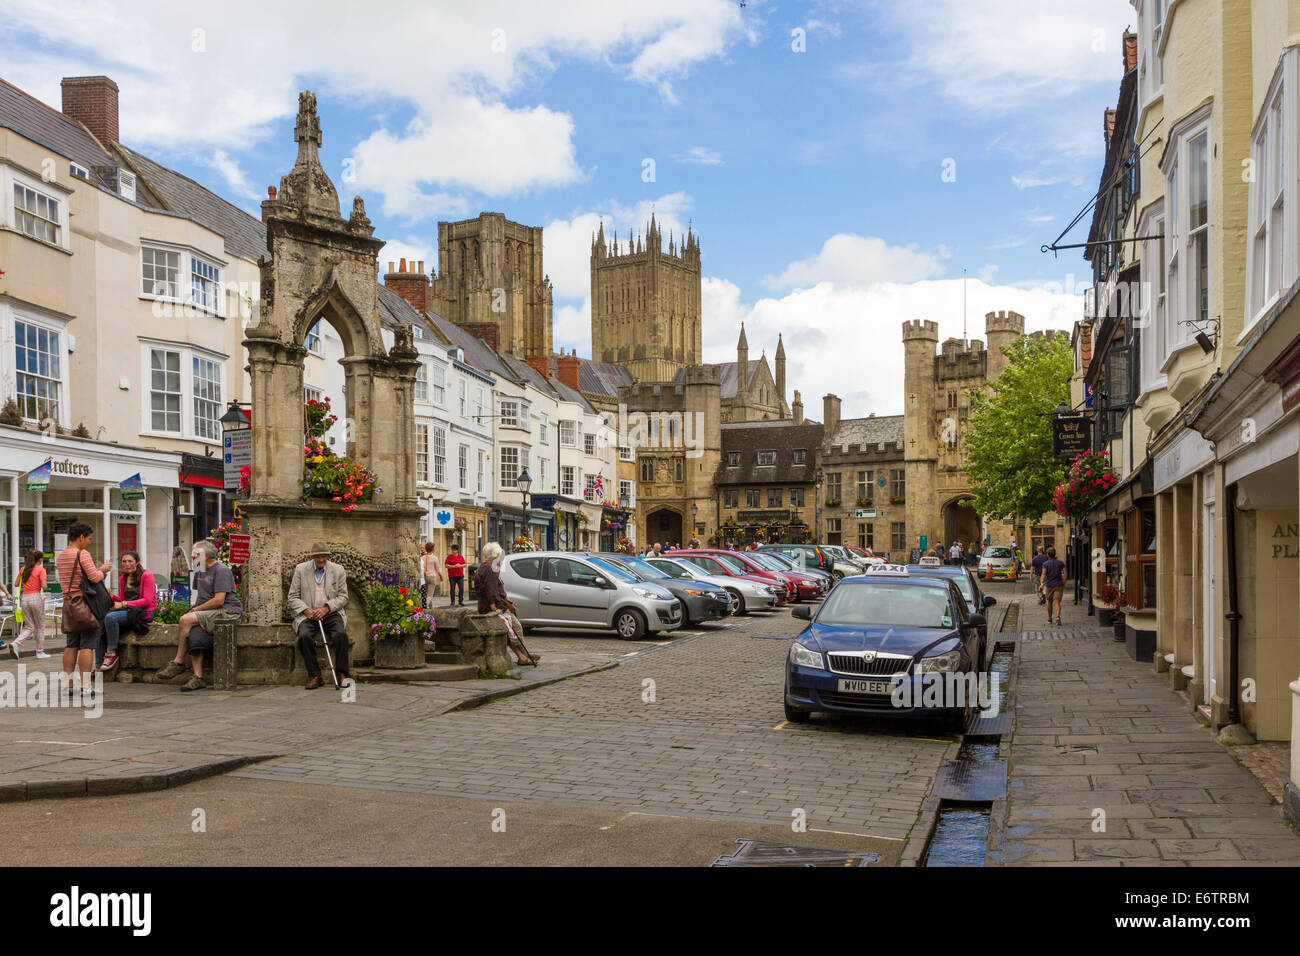 The Market Square in Wells, Somerset. Stock Photo